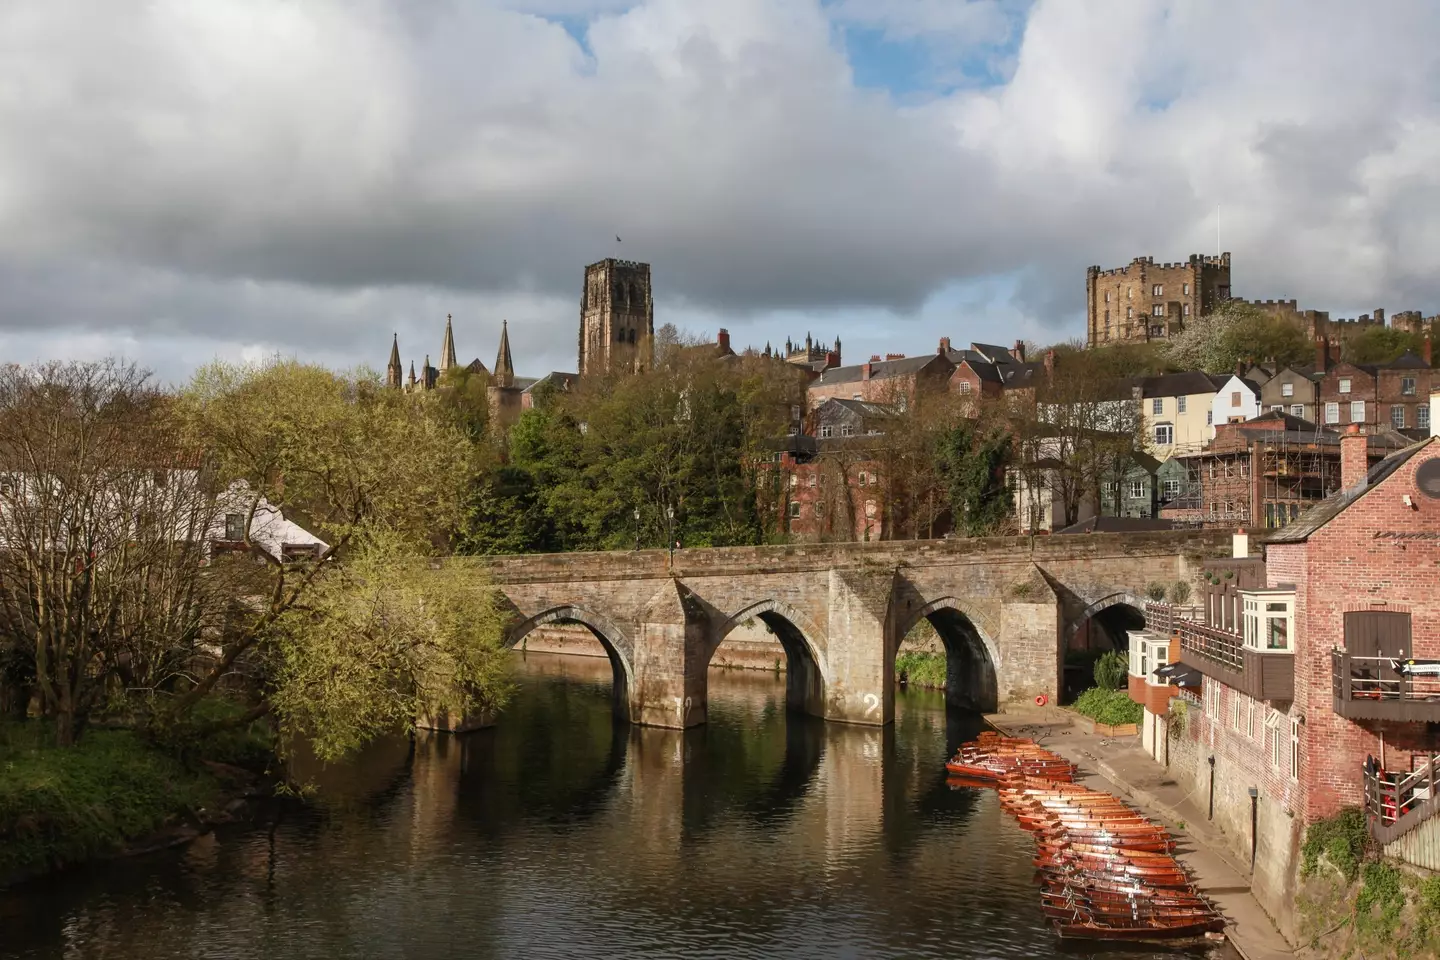 There's one spot in the UK where you'll get in less trouble for smoking weed, Durham.